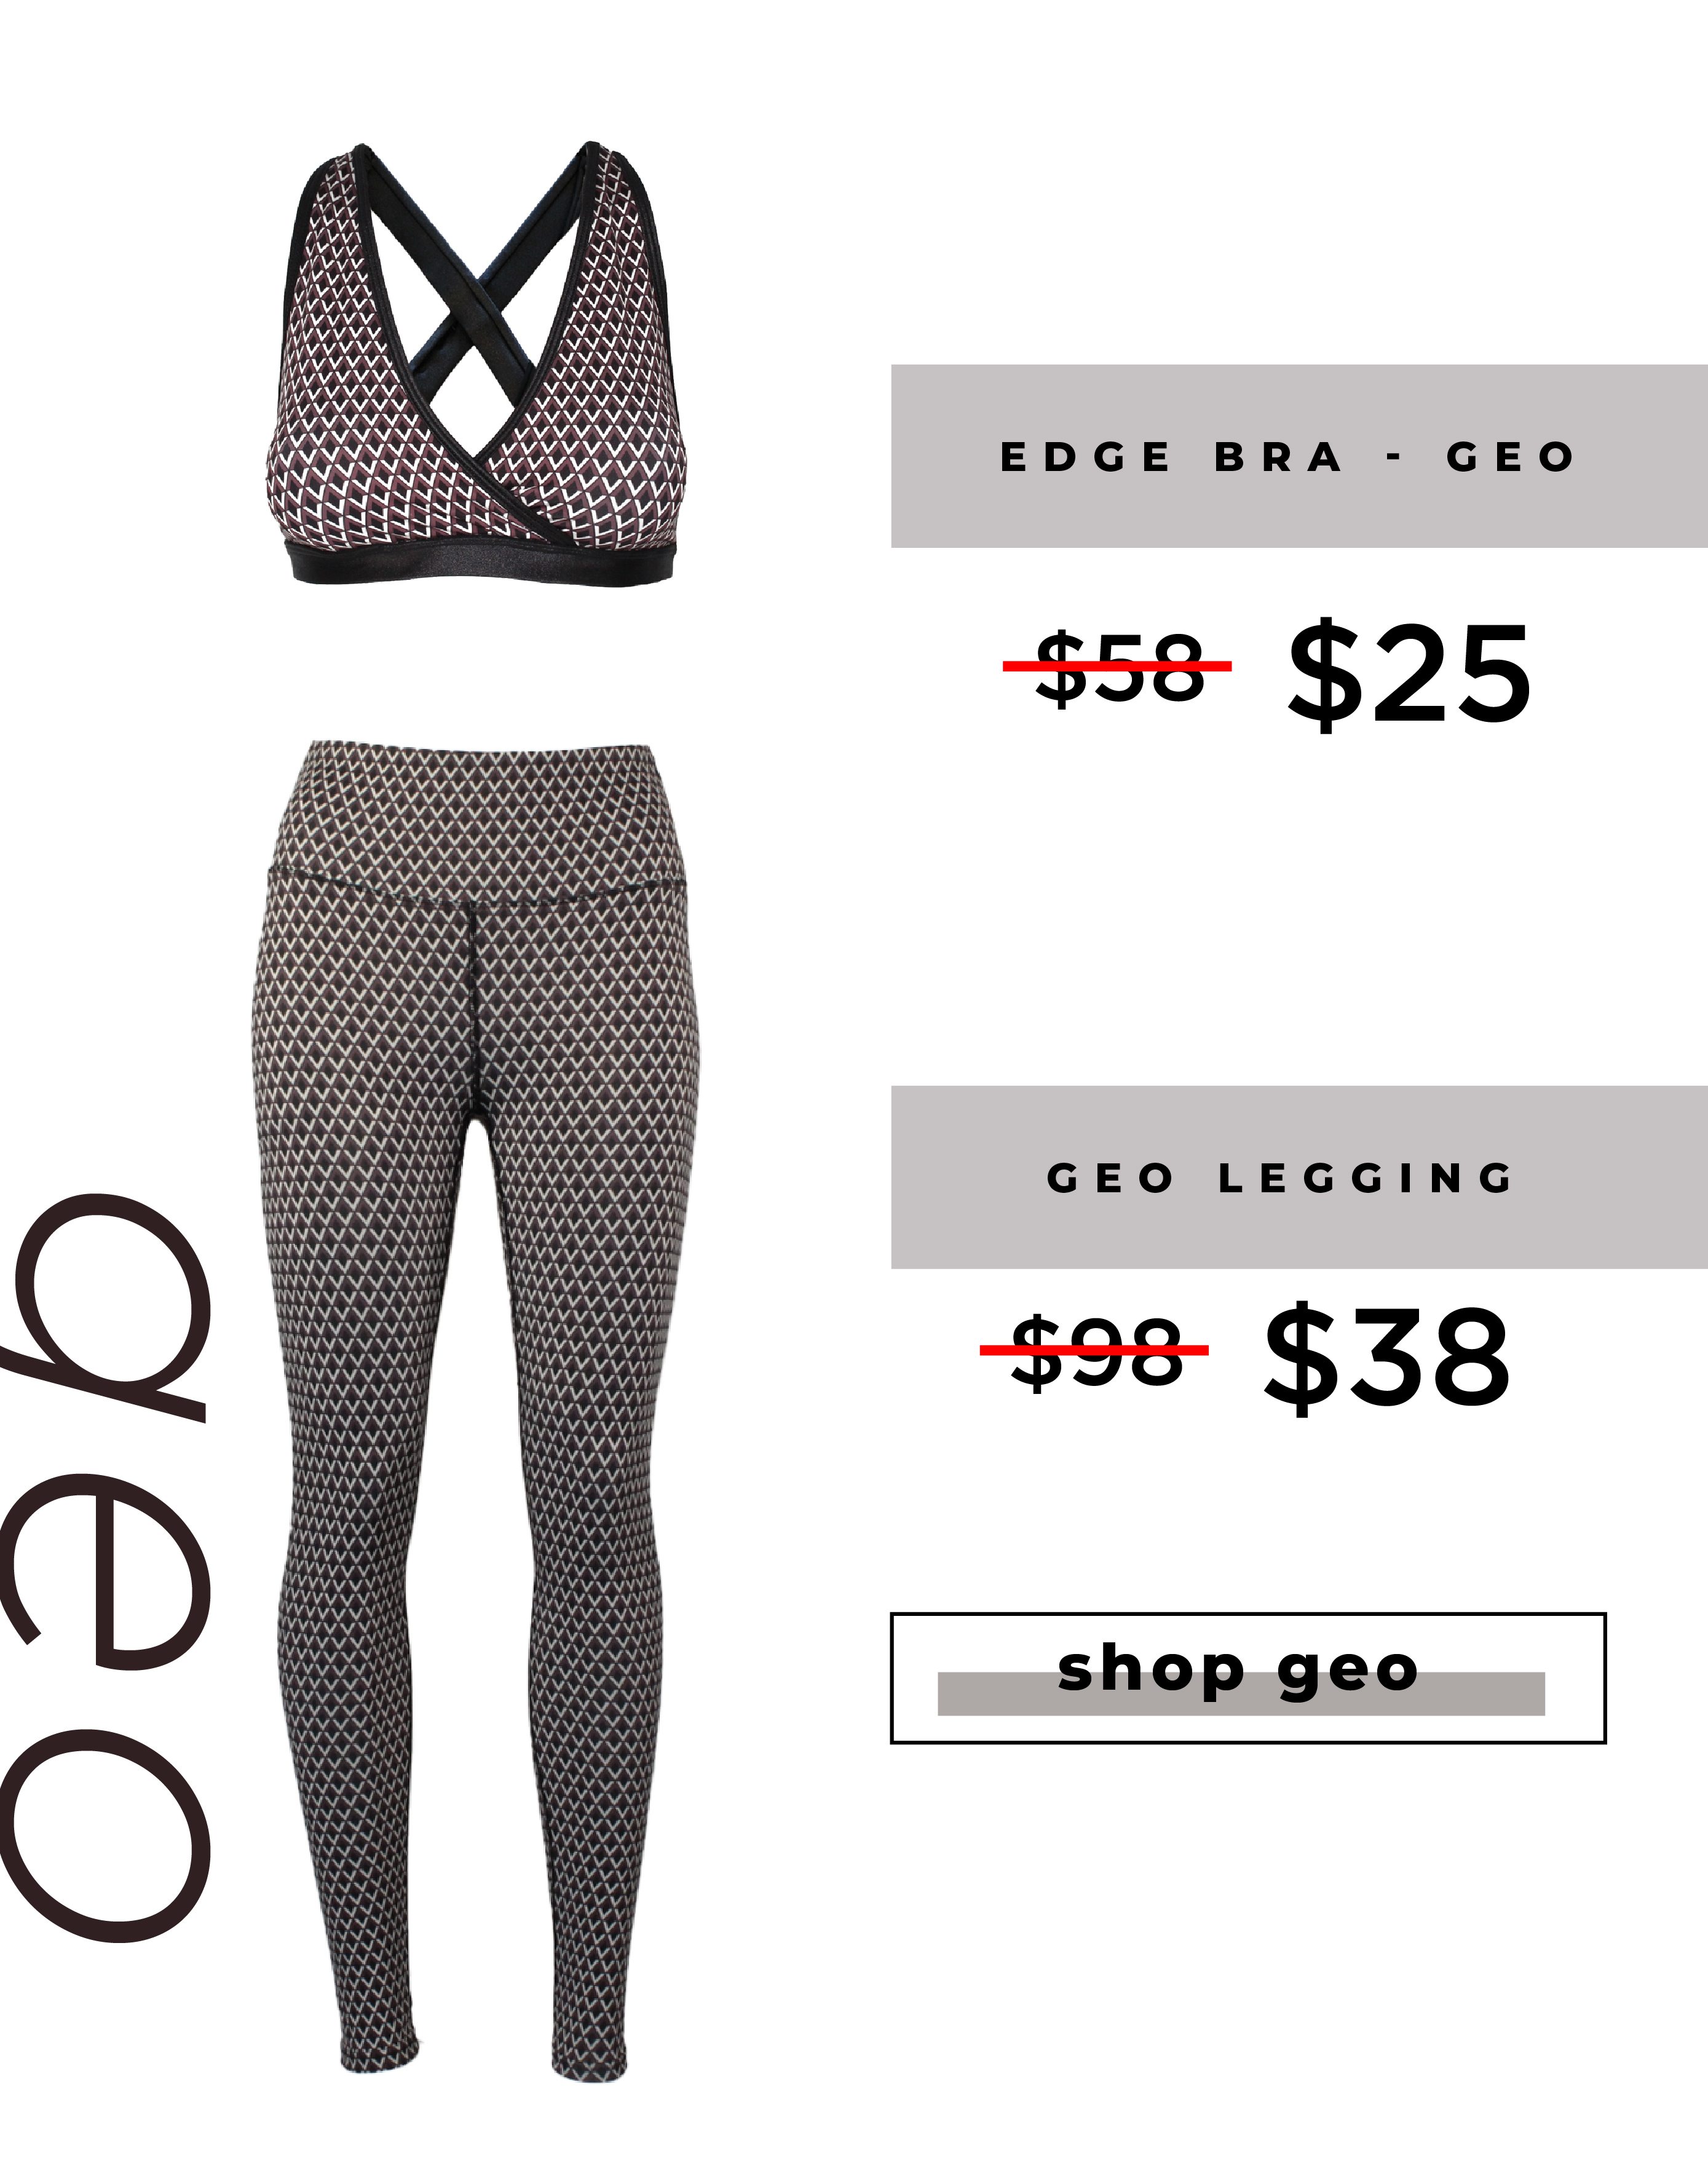 geo edge bra for as low as $25